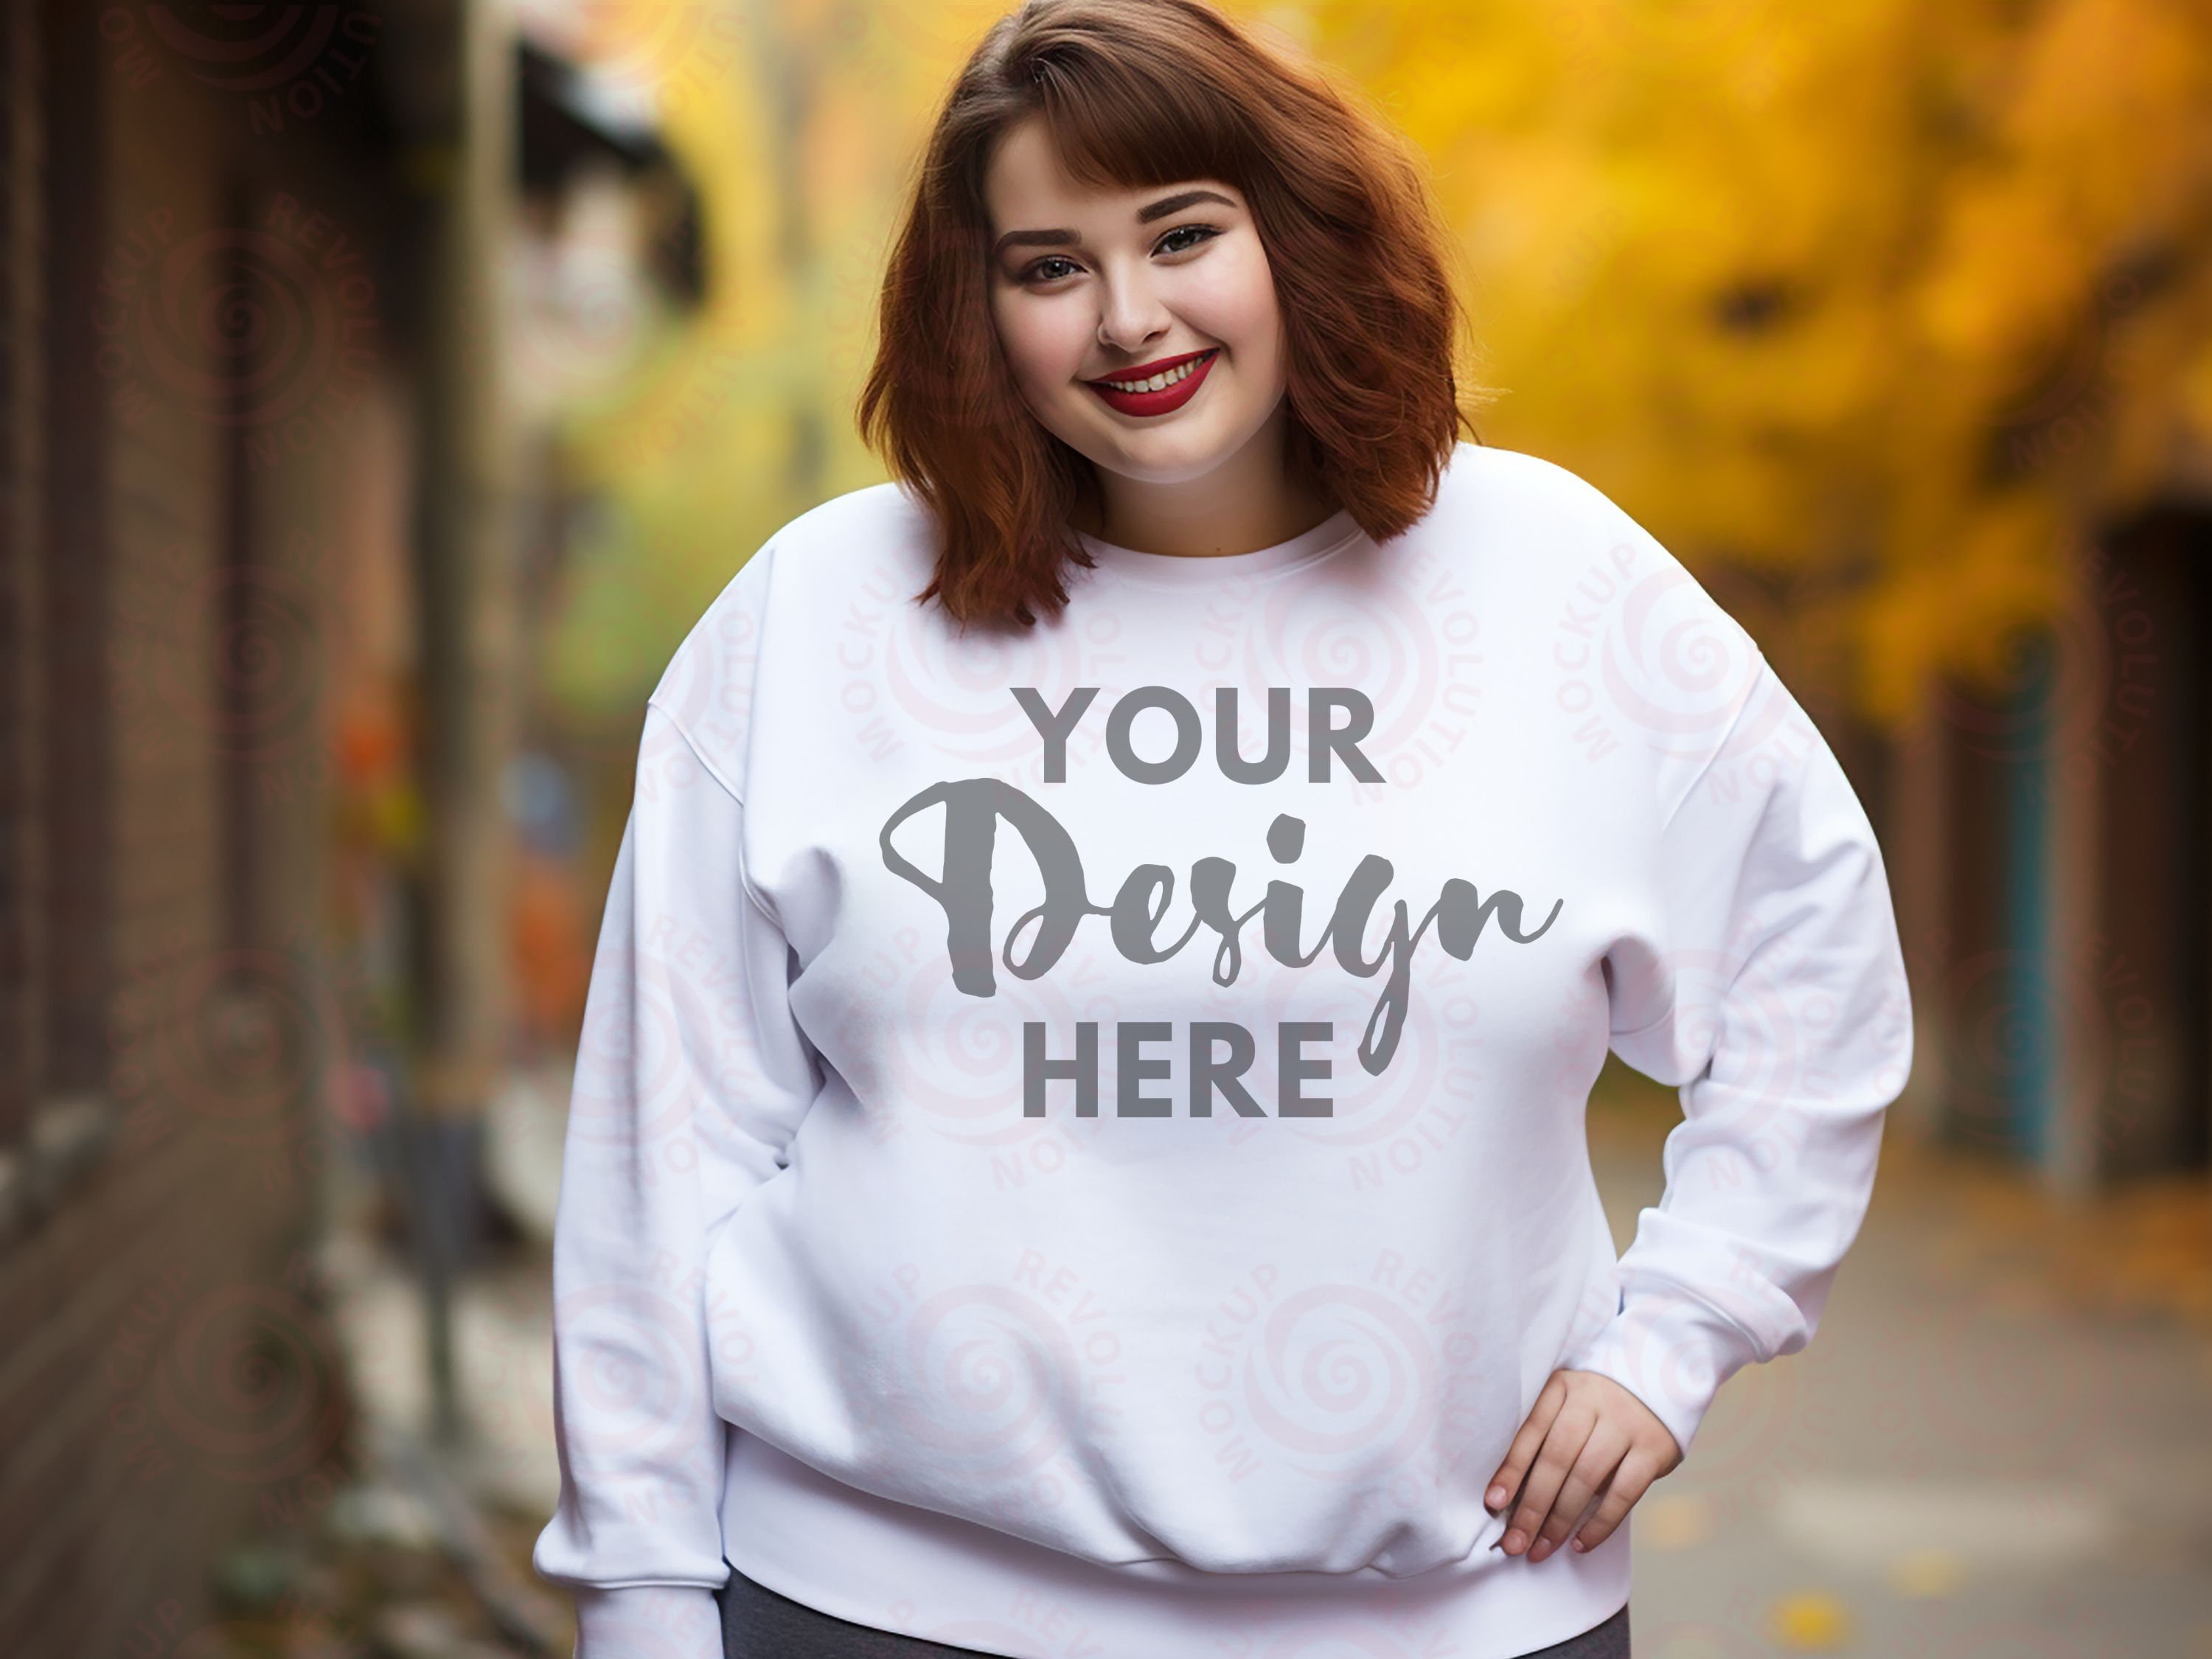 Dyegold Plus Size Fashion Ladies Fall Sweatshirts Plus Size Fall Tops  Cotton Ladies ​Halloween ​Crewneck Sweatshirts For Women Graphic ​My Orders  